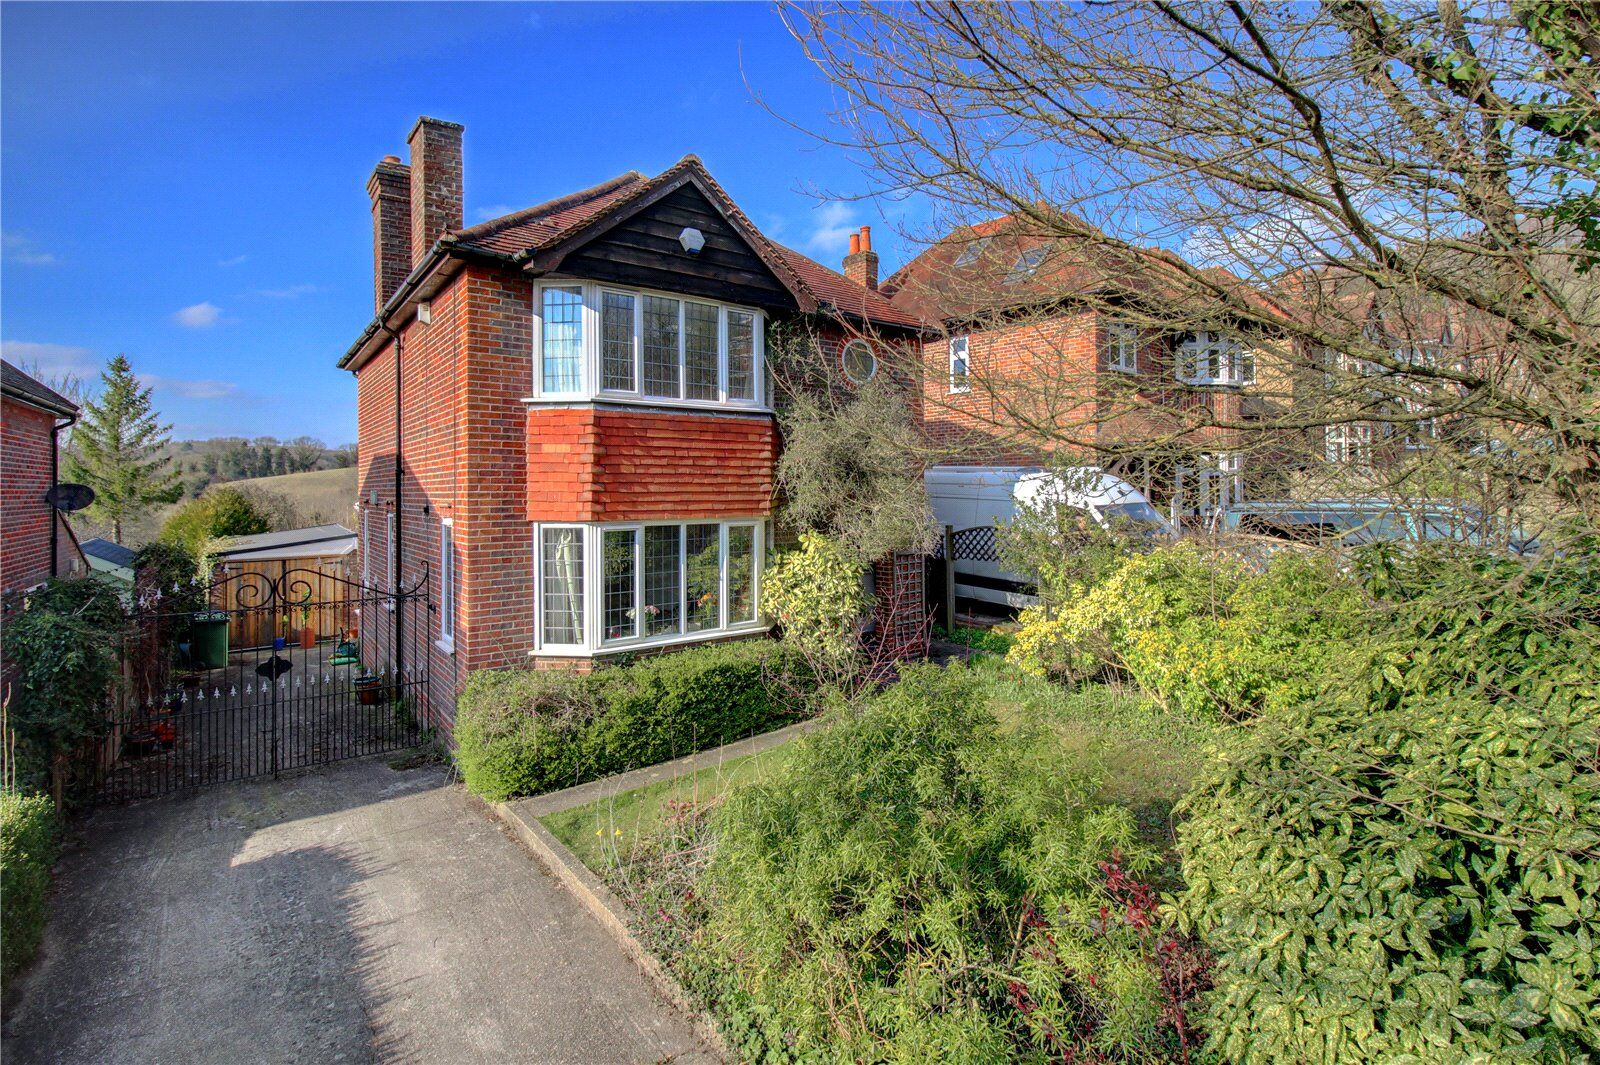 3 bedroom detached house for sale Green Hill, High Wycombe, HP13, main image